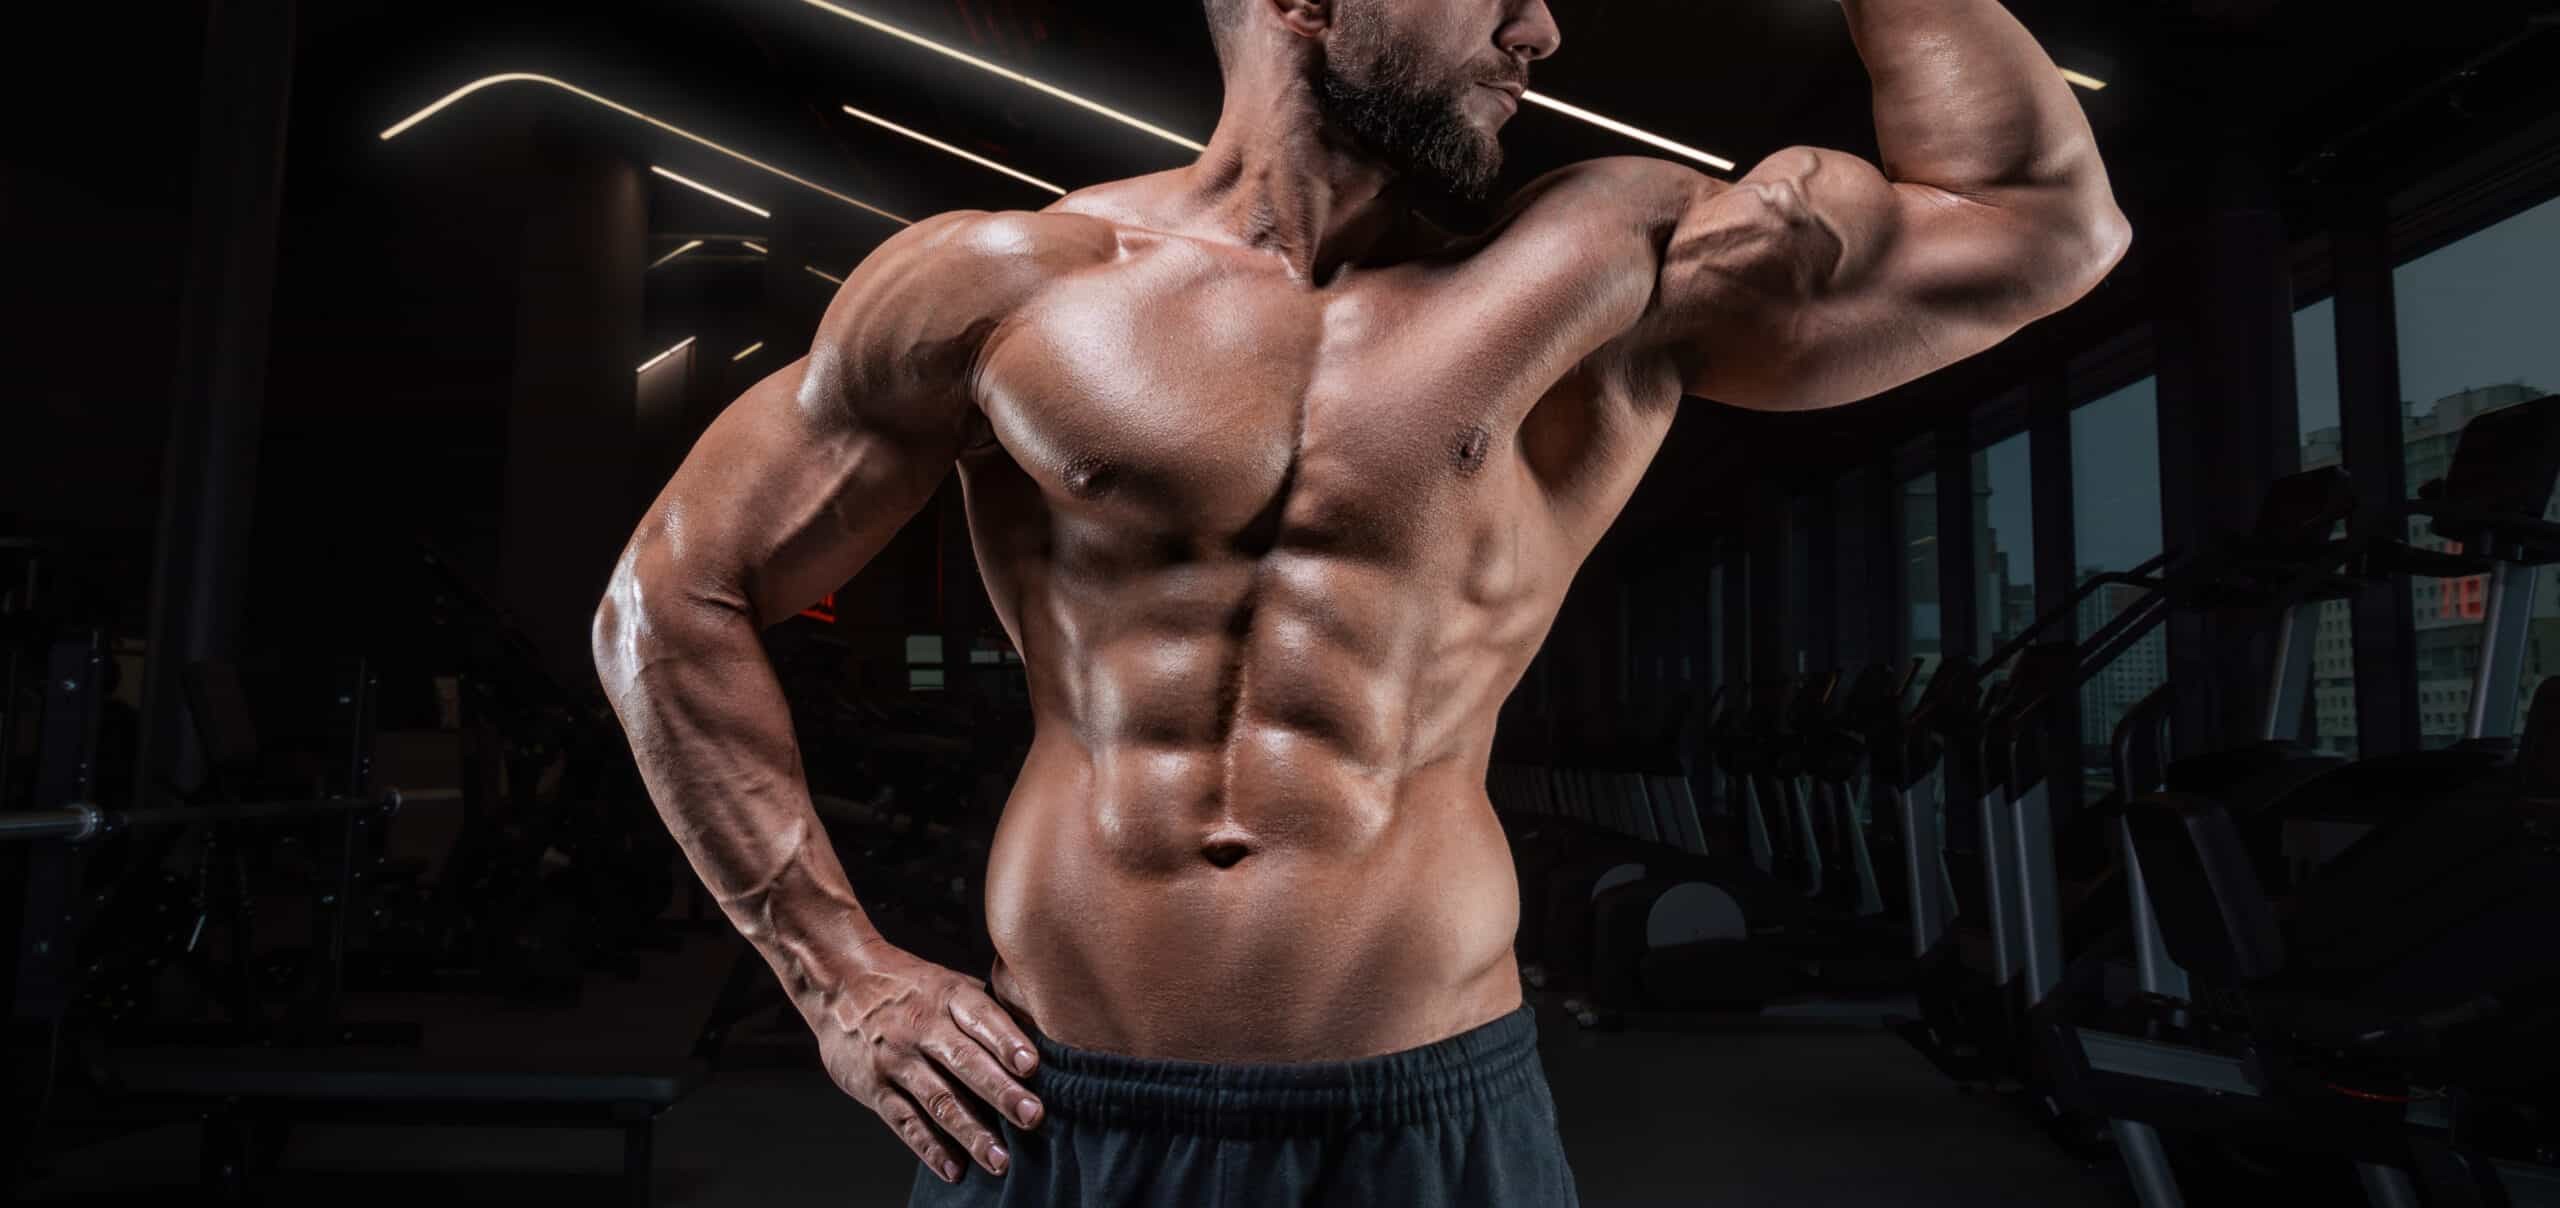 6-Pack Abs: Diet, Cardio, & Training Tips for Shredded Abs